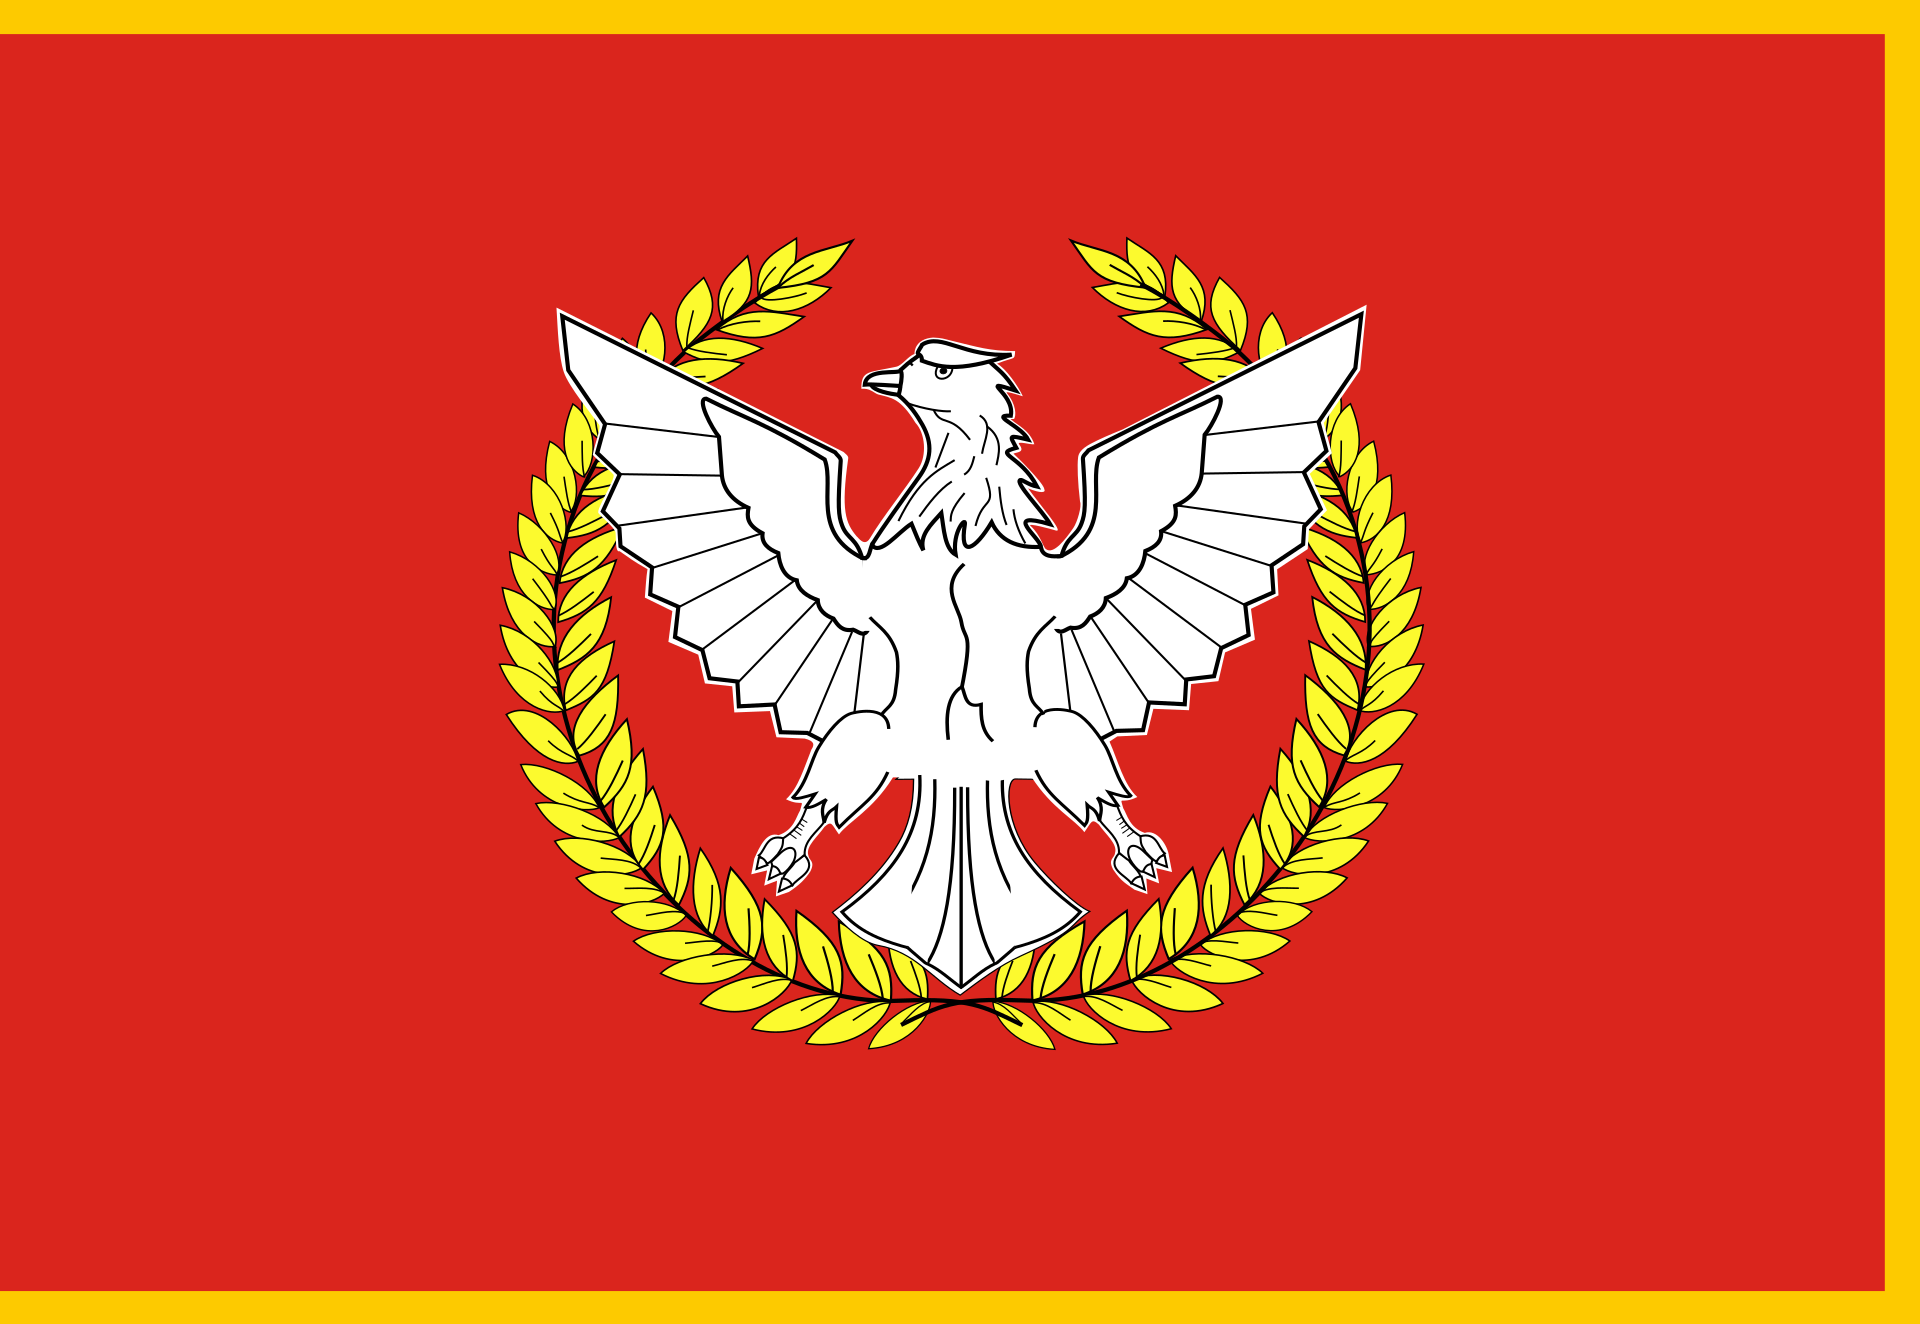 Flag of the Minister of National Defense of the Republic of Vietnam.svg